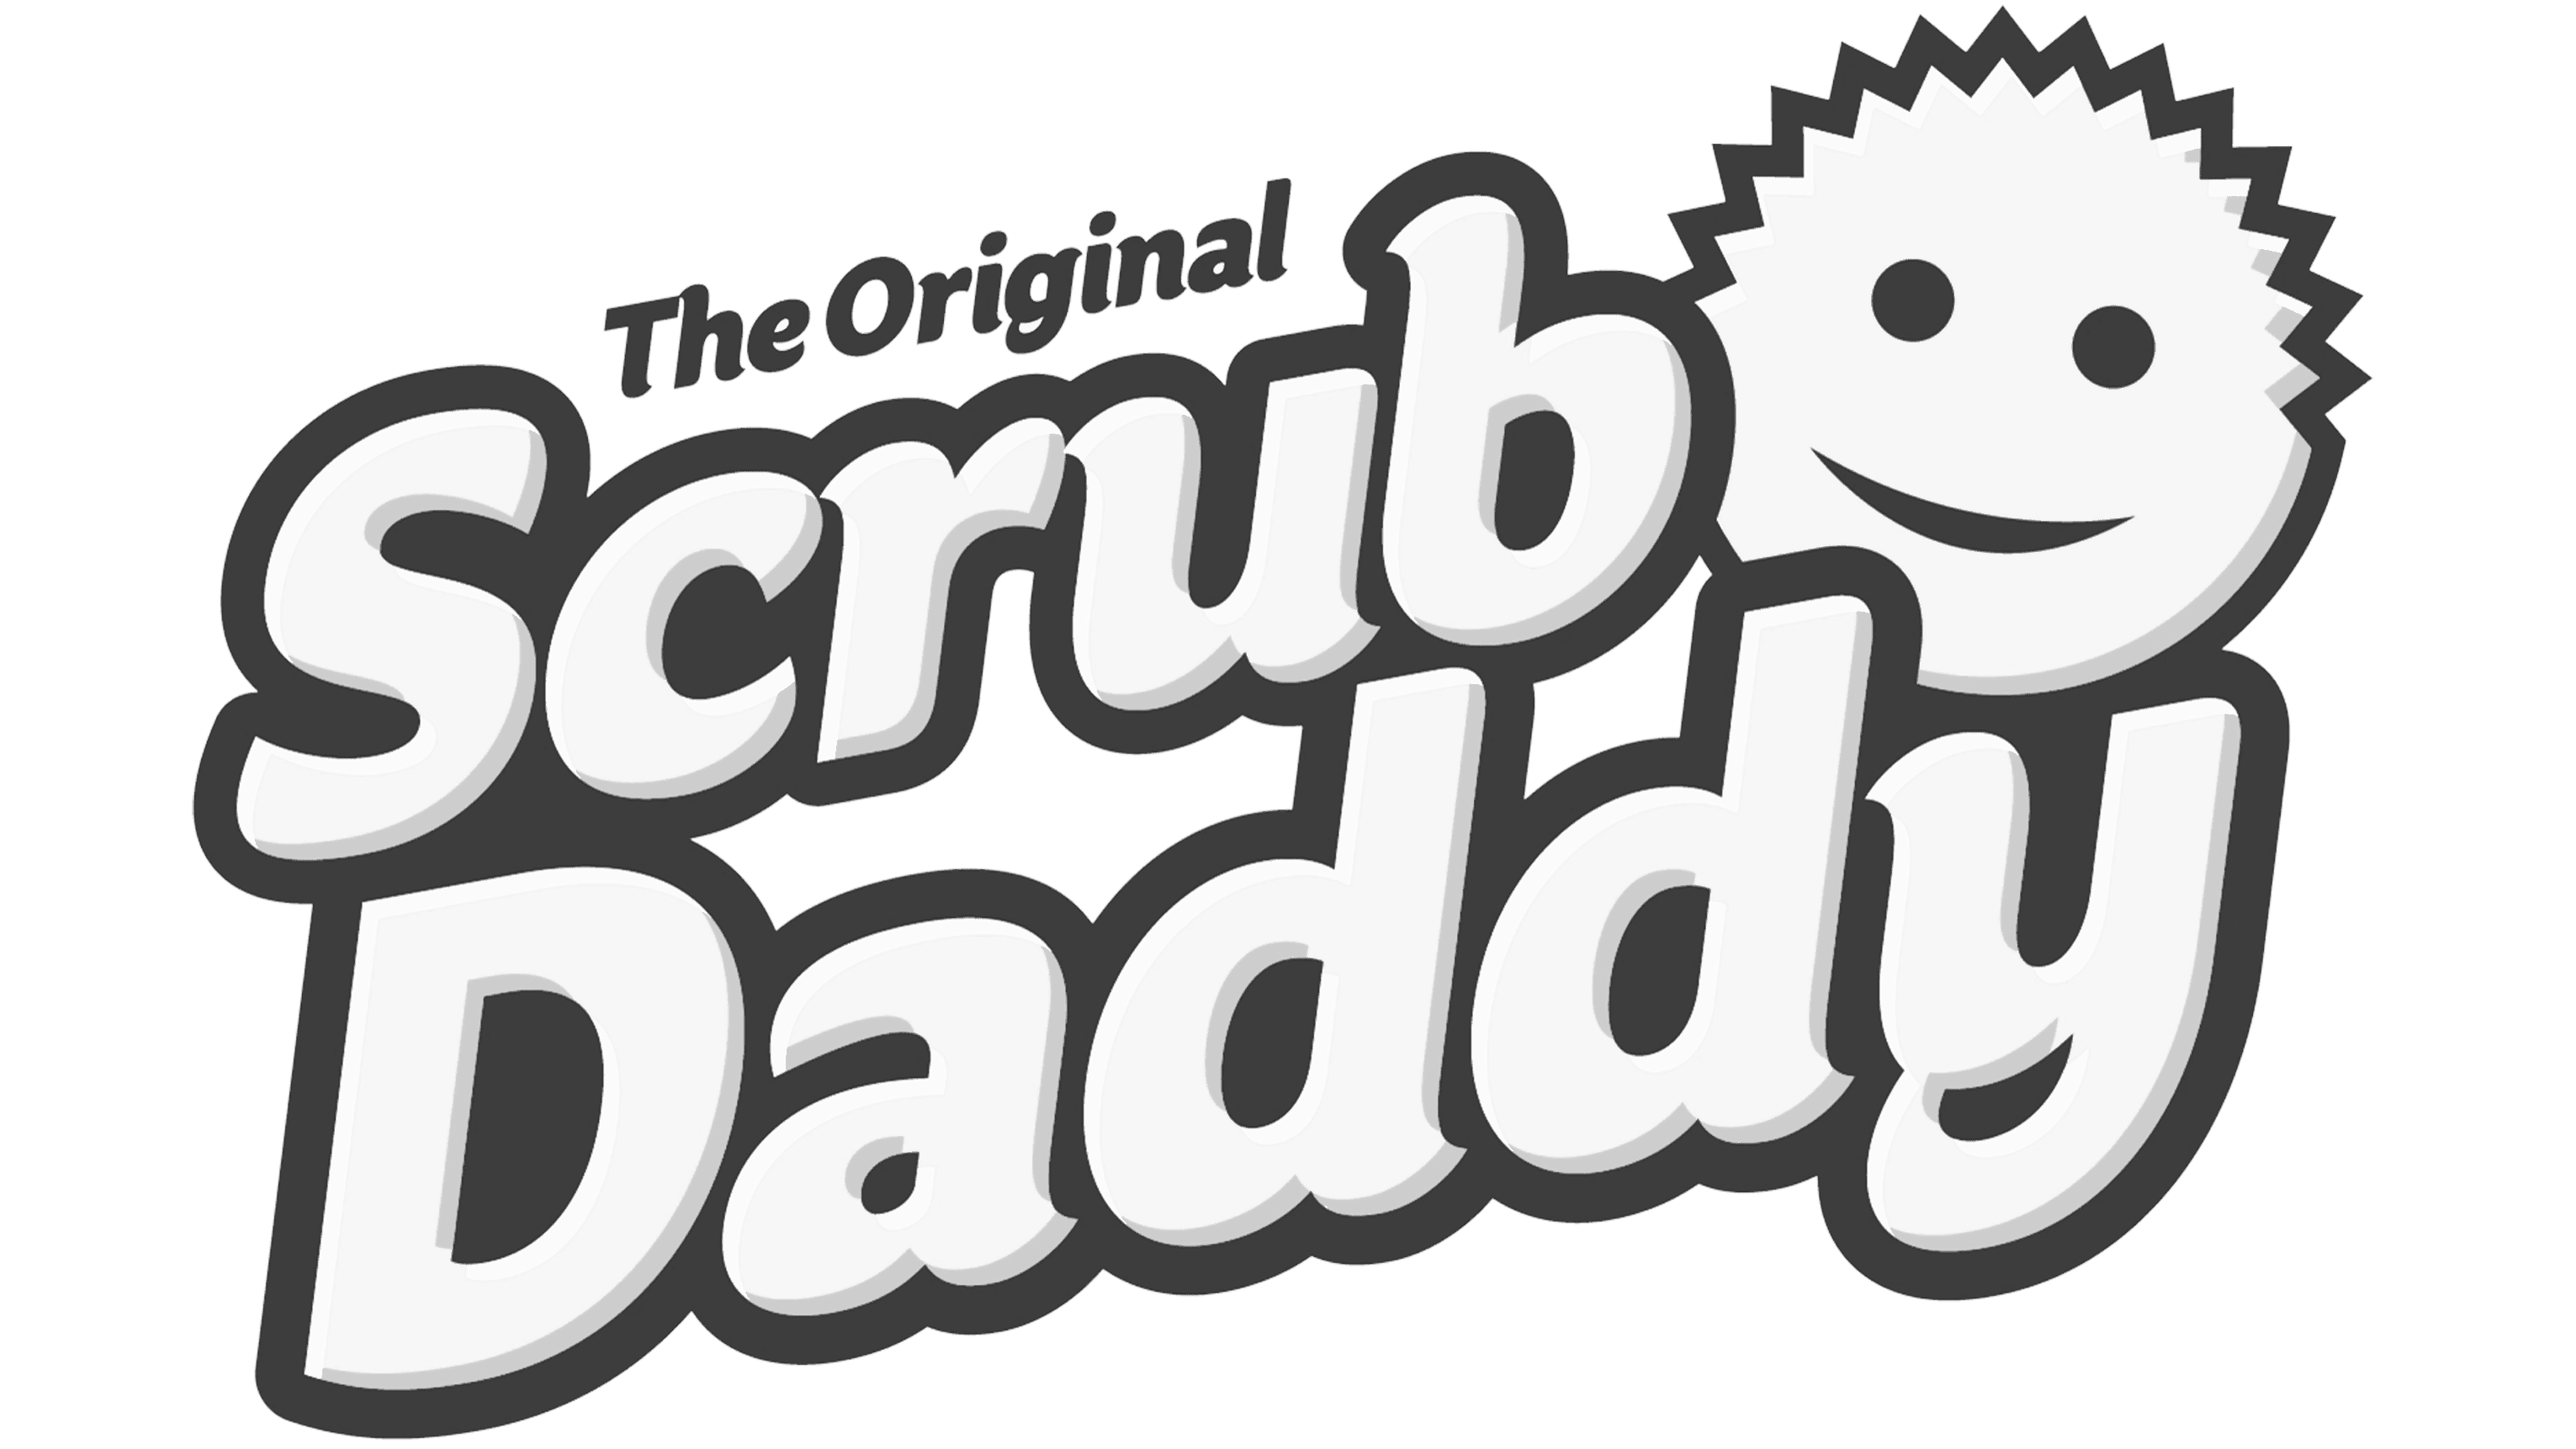 Daddy PNG Image HD